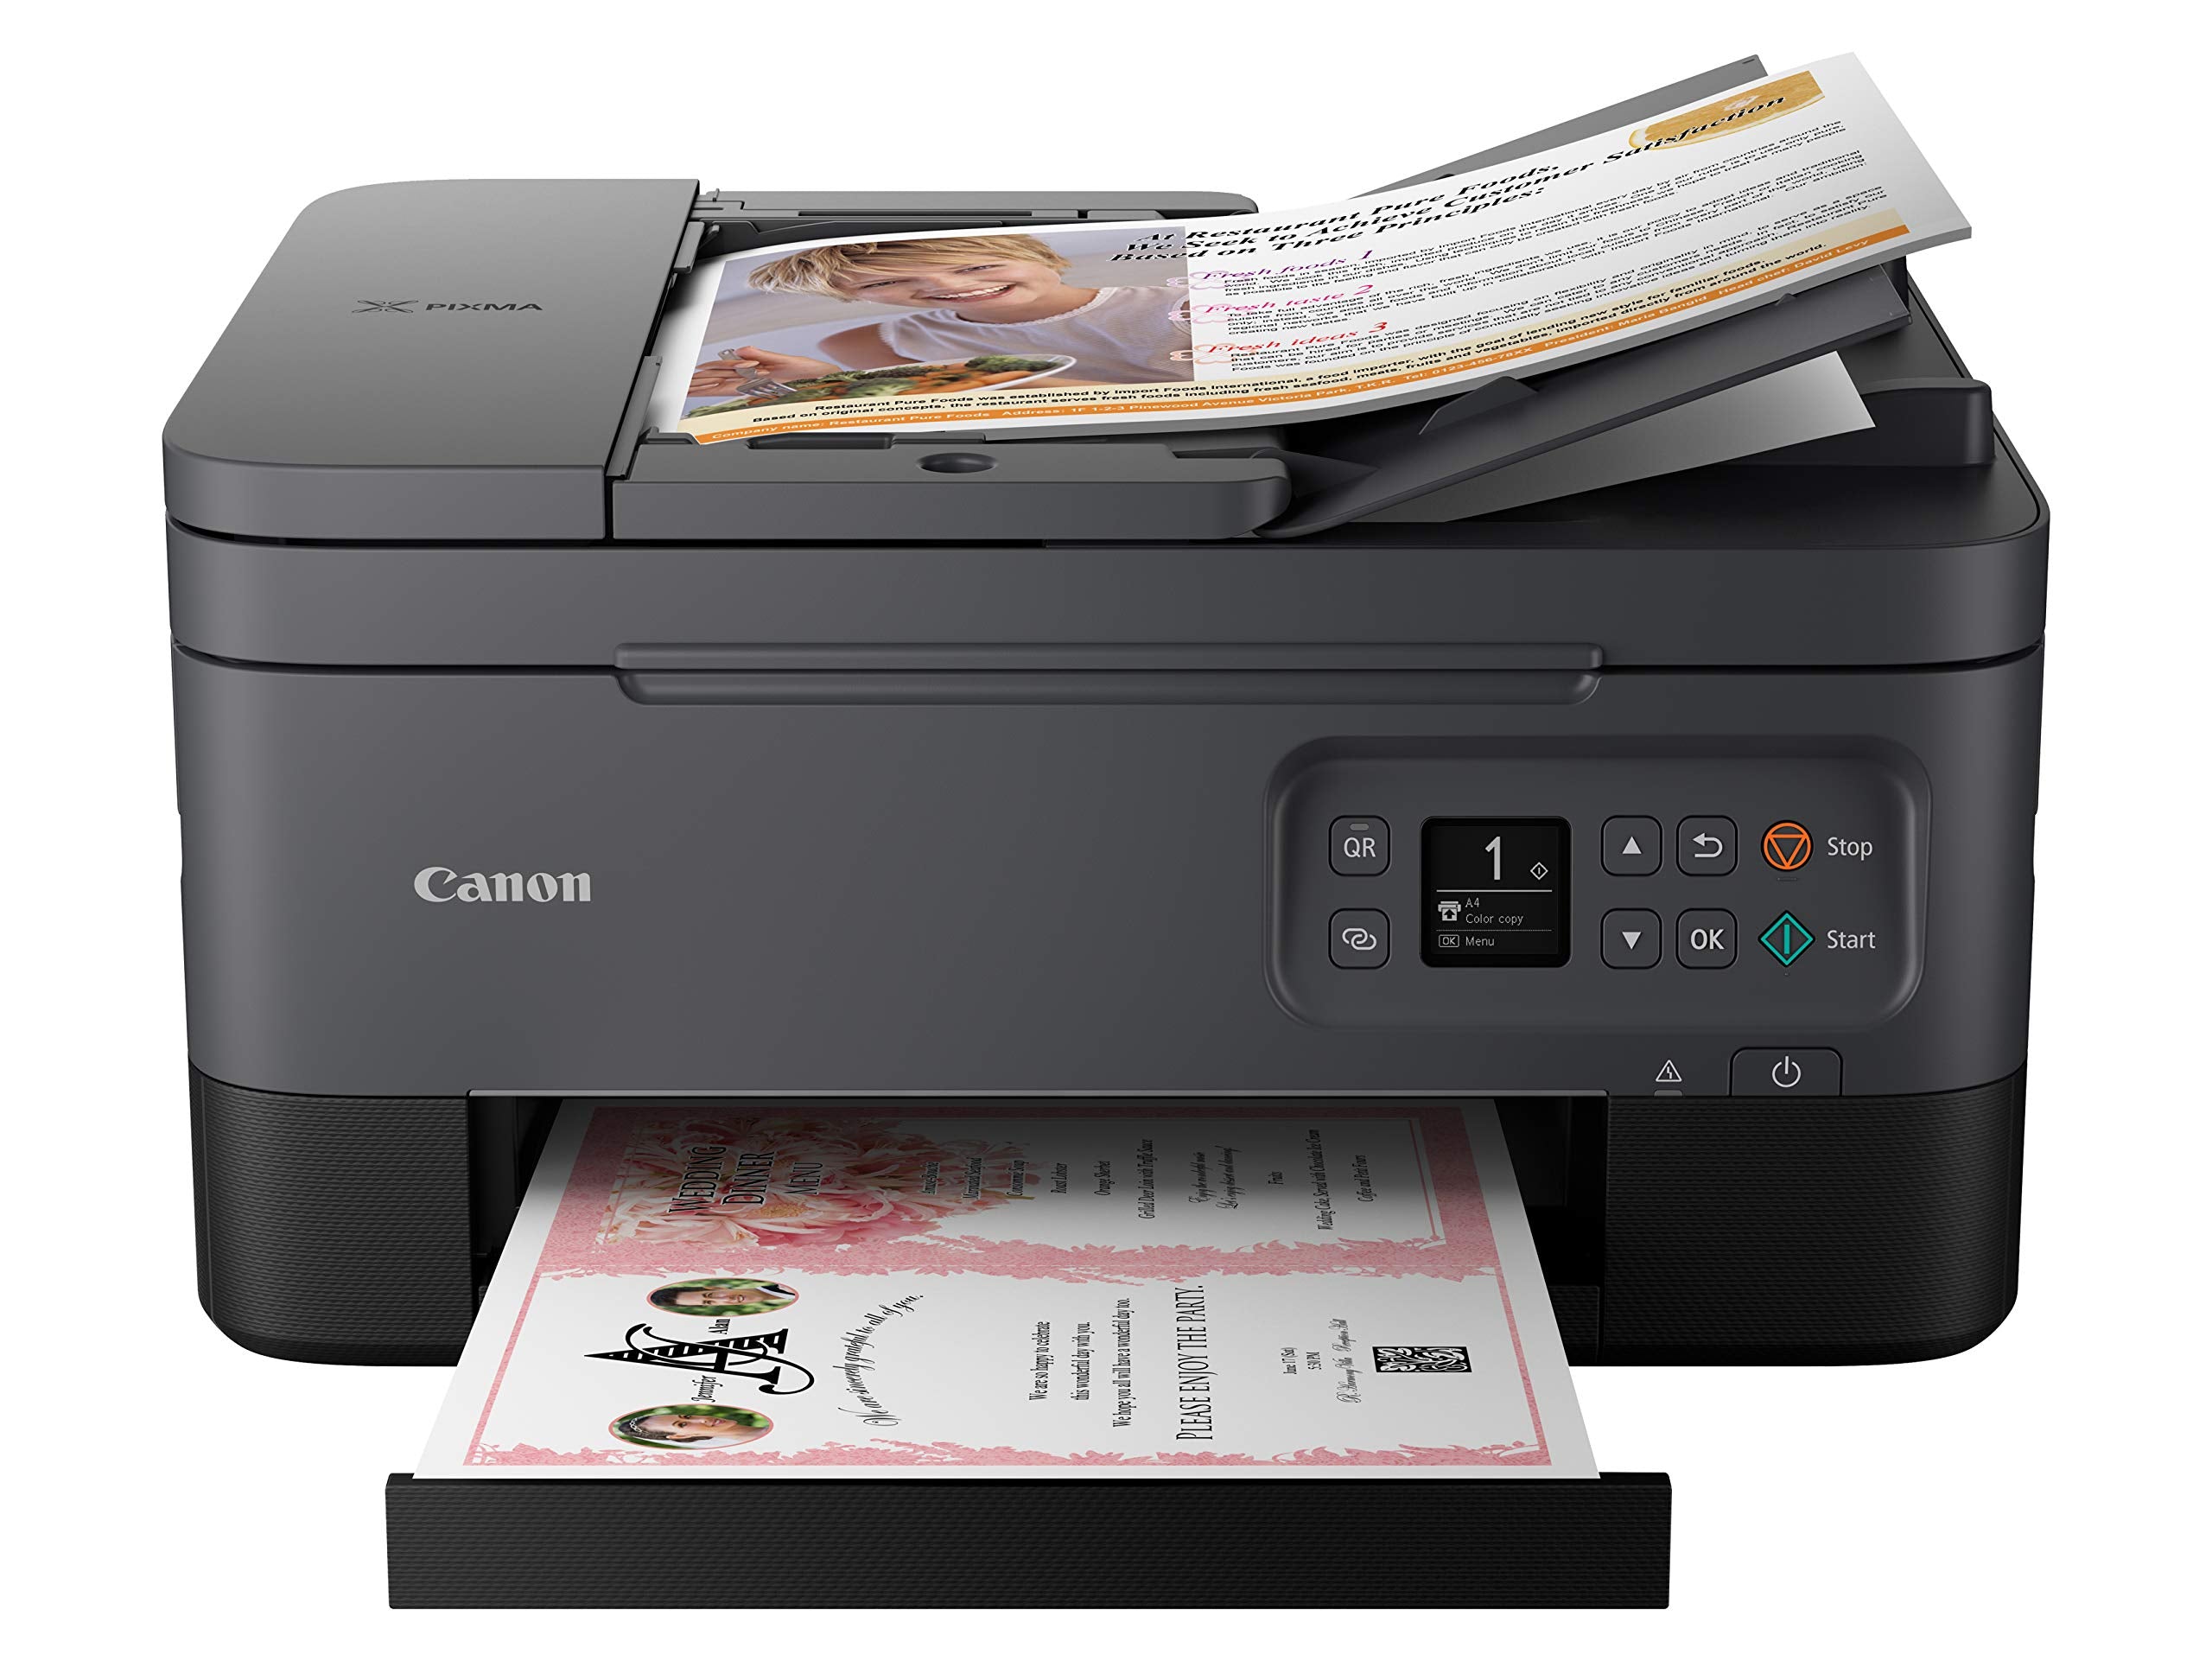 Canon TR7020 All-In-One Wireless Printer For Home Use,Black  - Like New